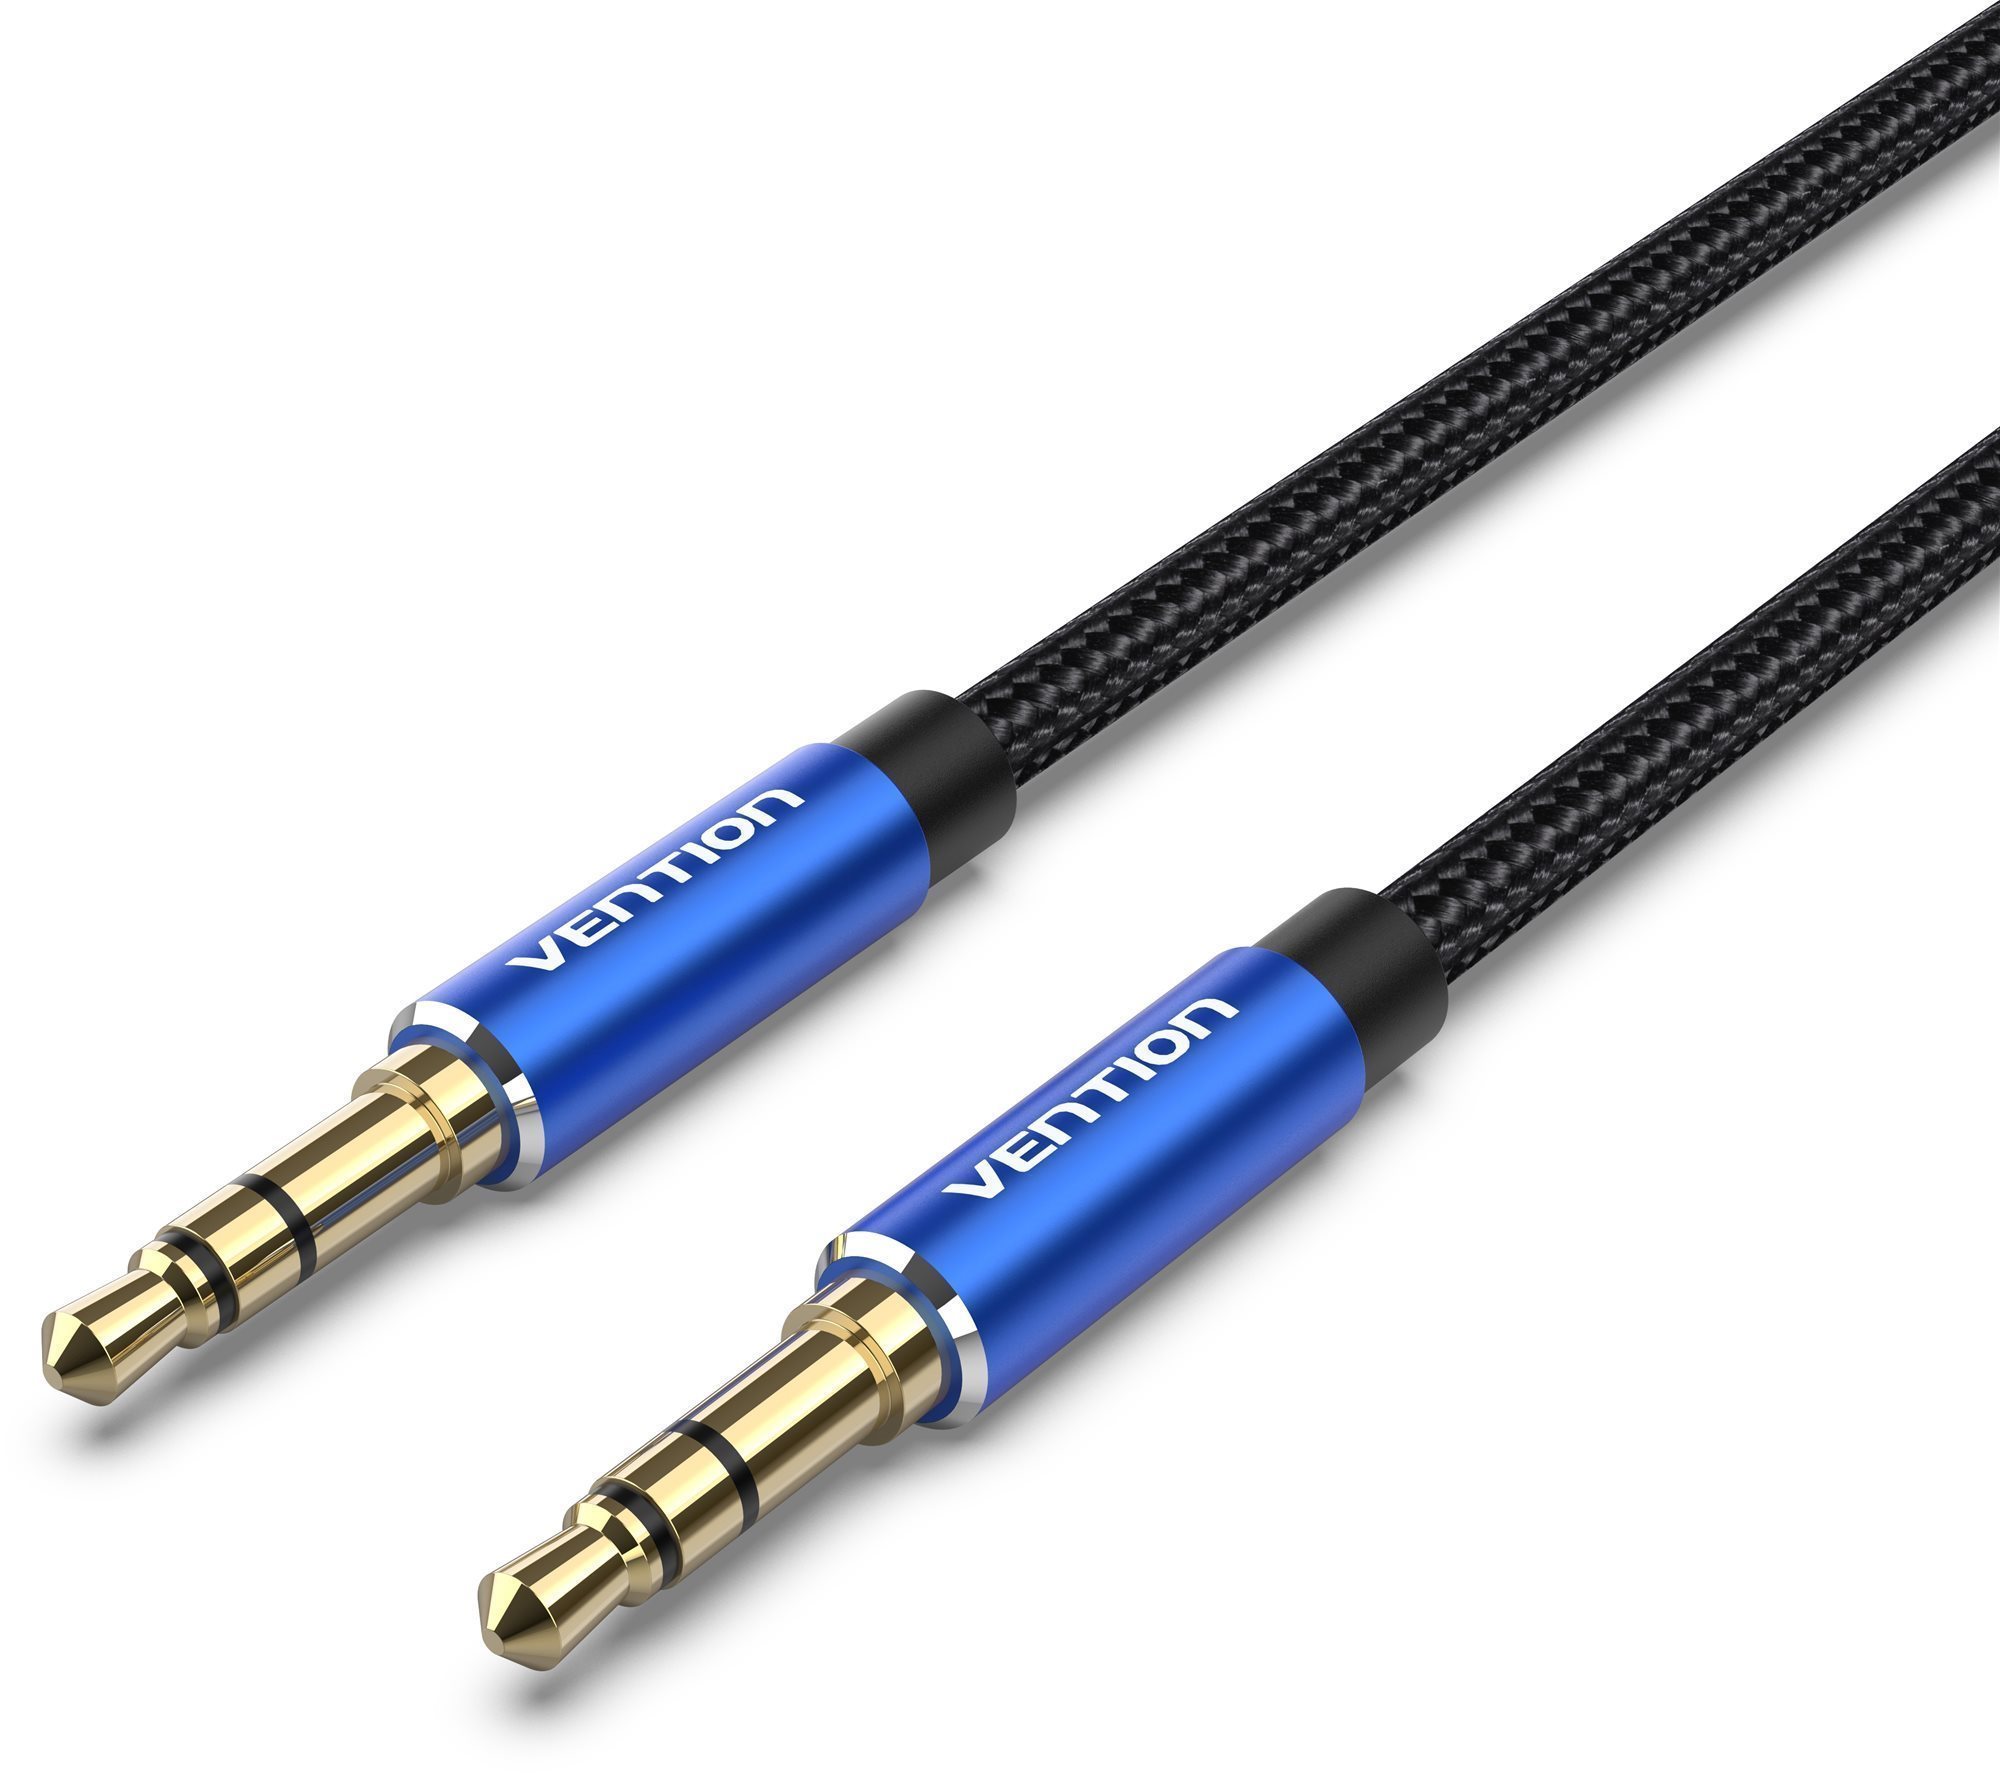 Vention Cotton Braided 3,5 mm Male to Male Audio Cable 5 m Black Aluminum Alloy Type